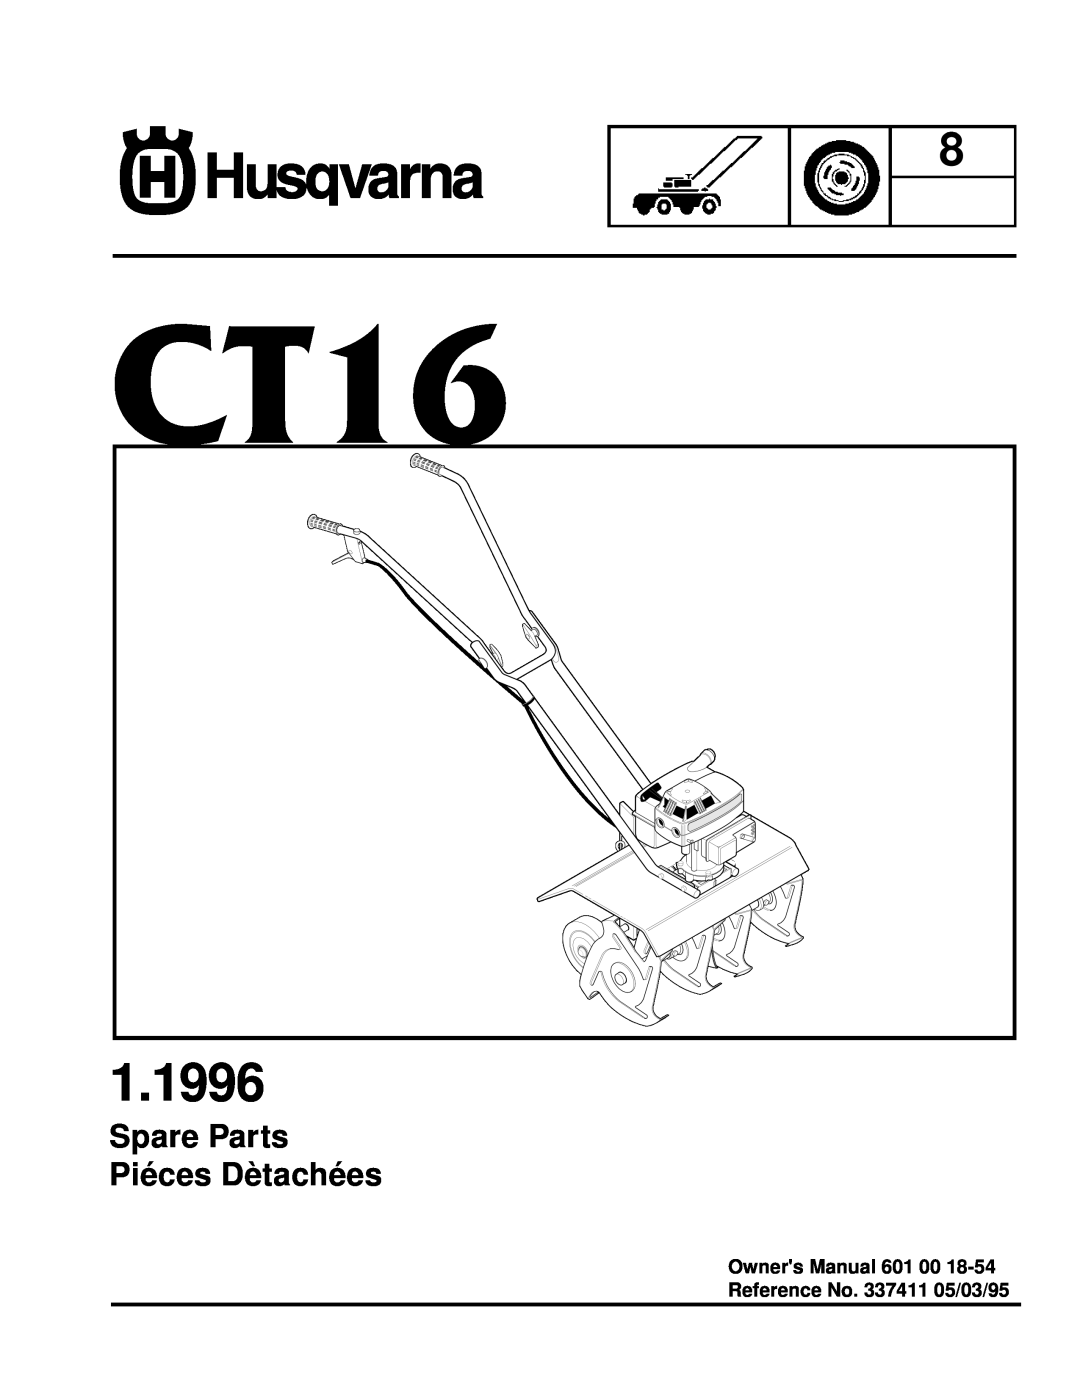 Husqvarna CT16 owner manual 1.1996, Spare Parts Piéces Dètachées, Owners Manual 601 00 Reference No. 337411 05/03/95 